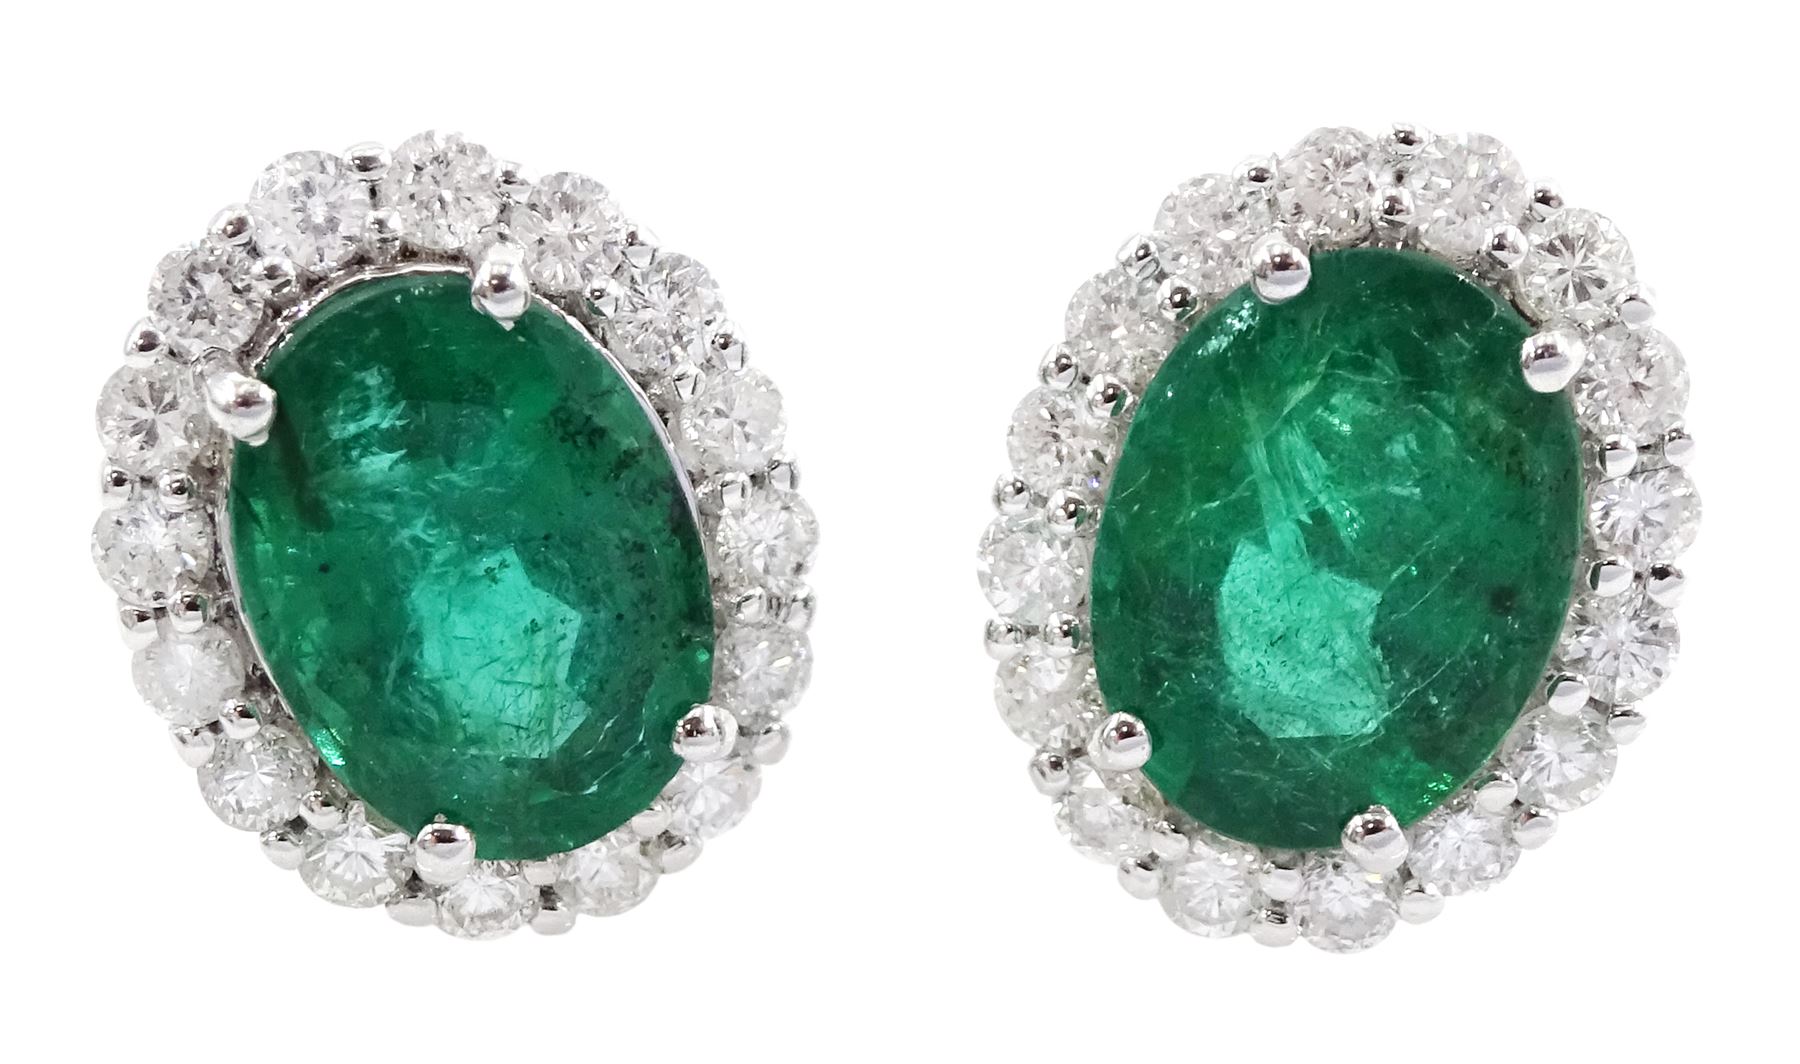 Pair of 18ct white gold oval emerald and round brilliant cut diamond cluster stud earrings